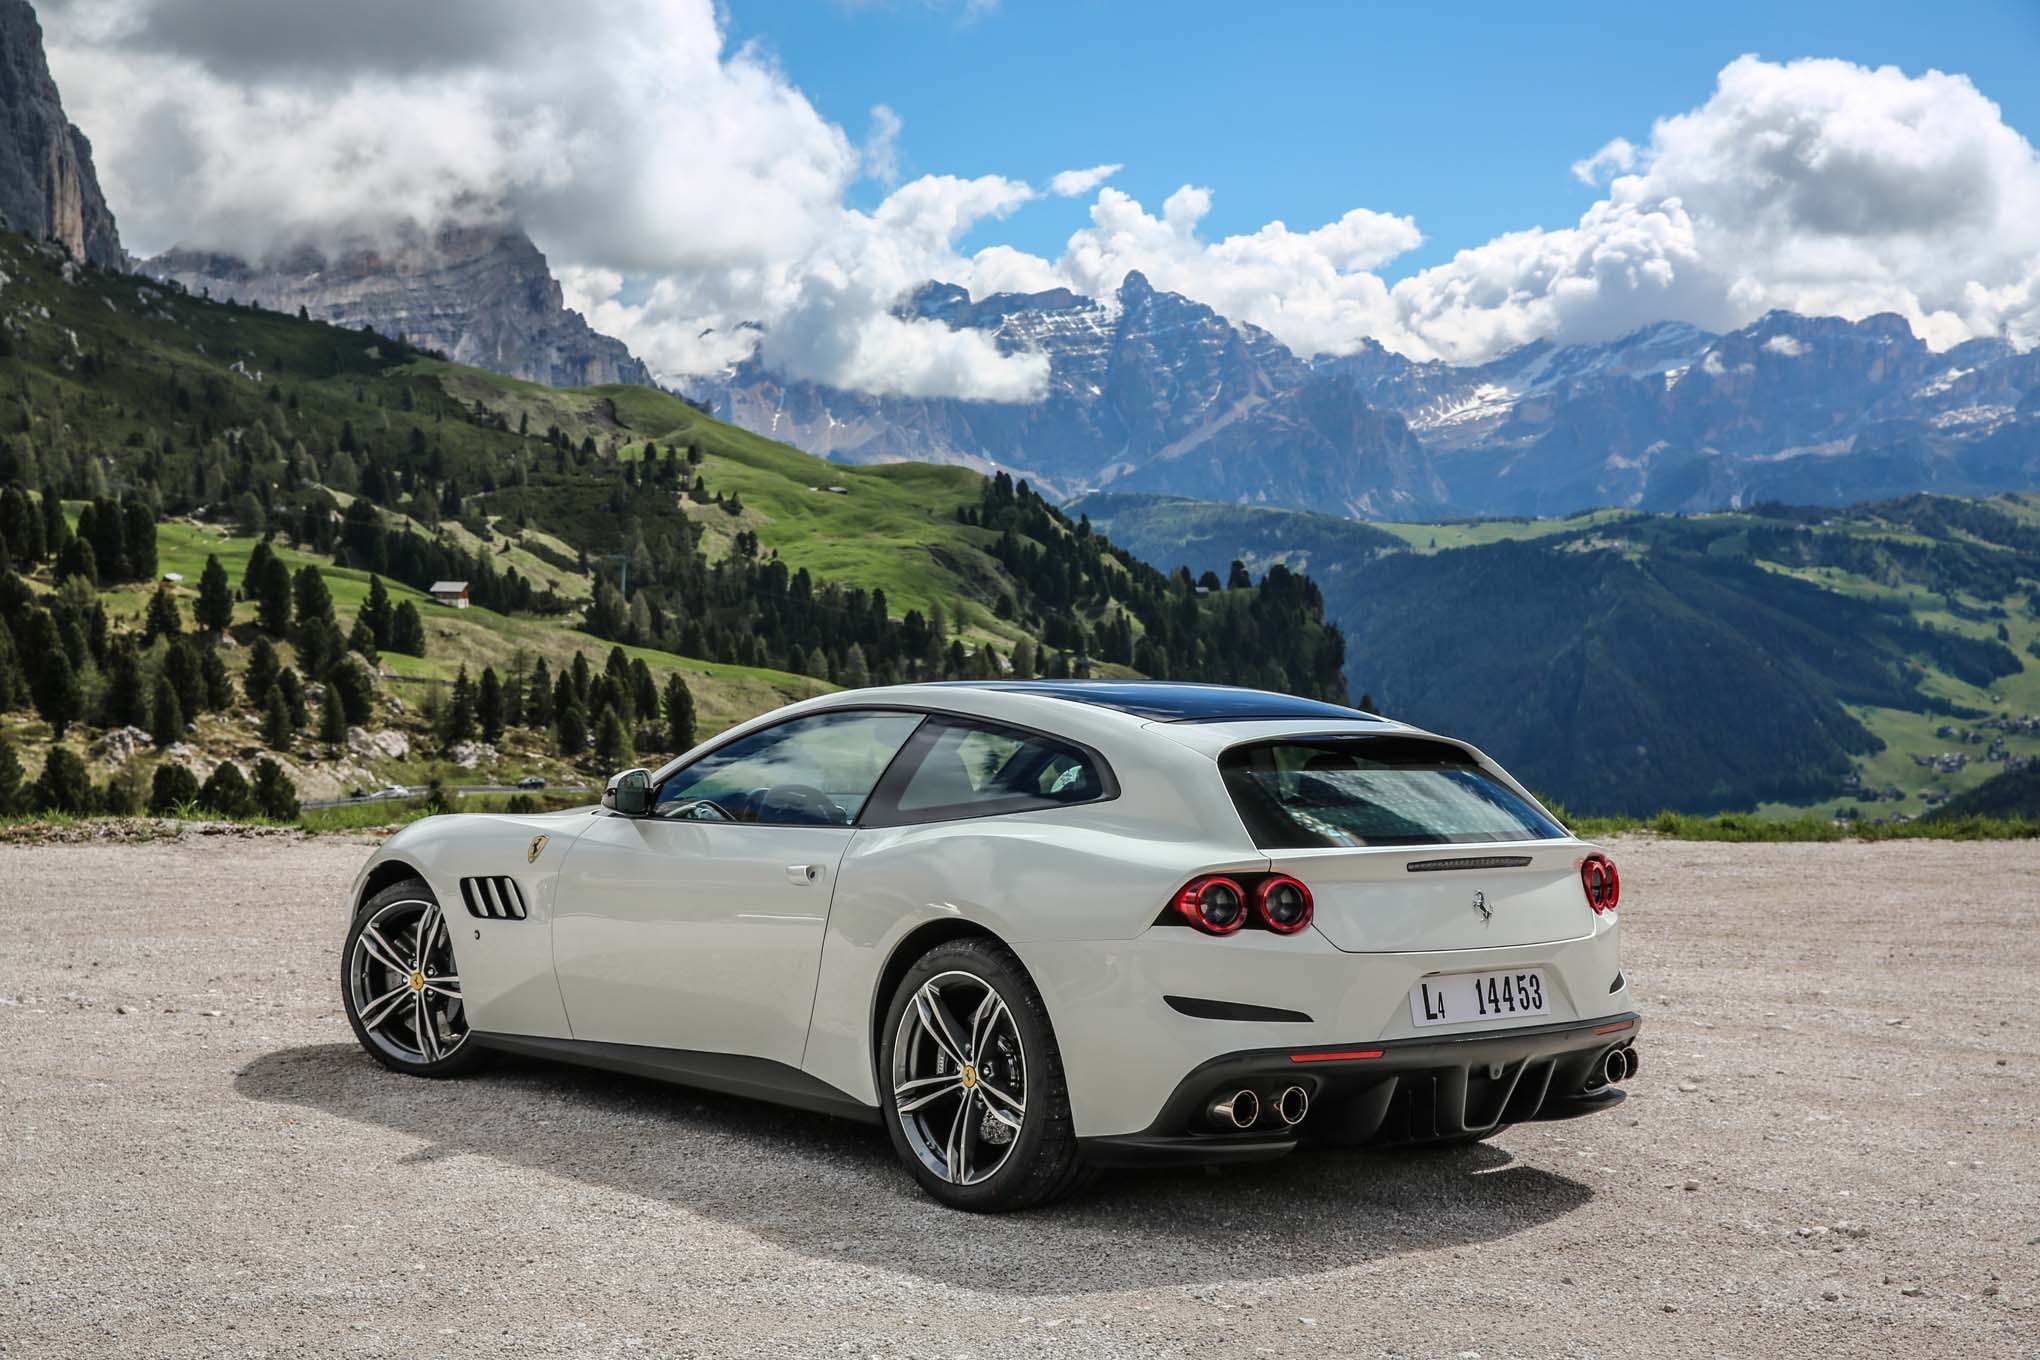 Ferrari GTC4 Lusso, Shared wallpapers, Posted by fans, Community of enthusiasts, 2040x1360 HD Desktop